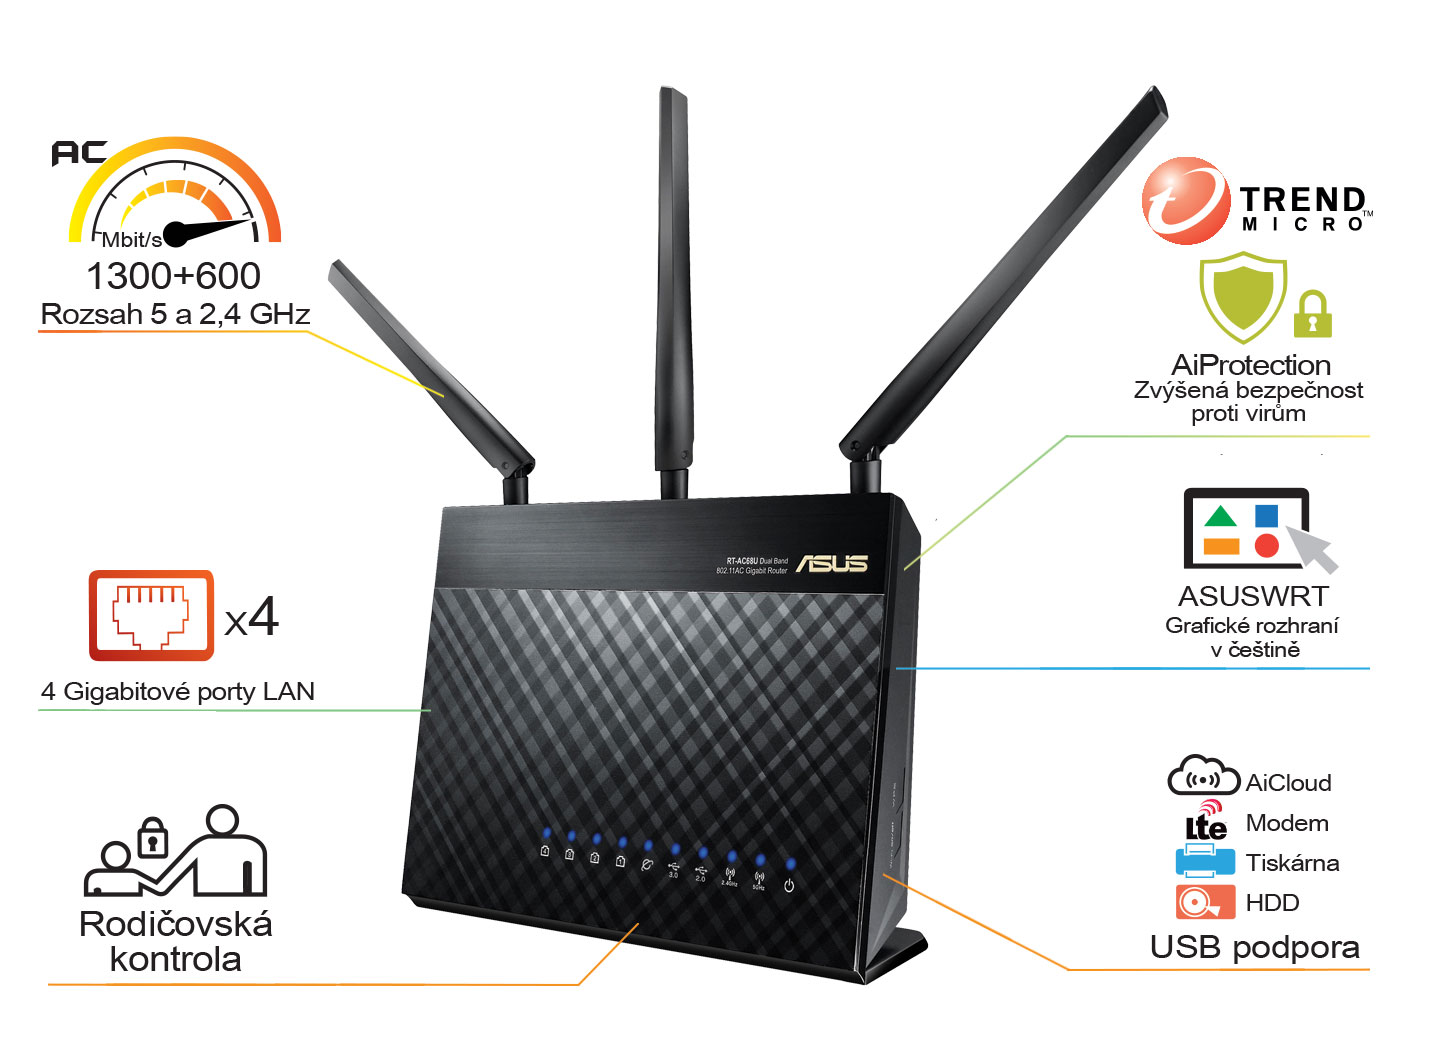 ASUS RT-AC68 Wireless AC1900 Dual-band Gigabit Router